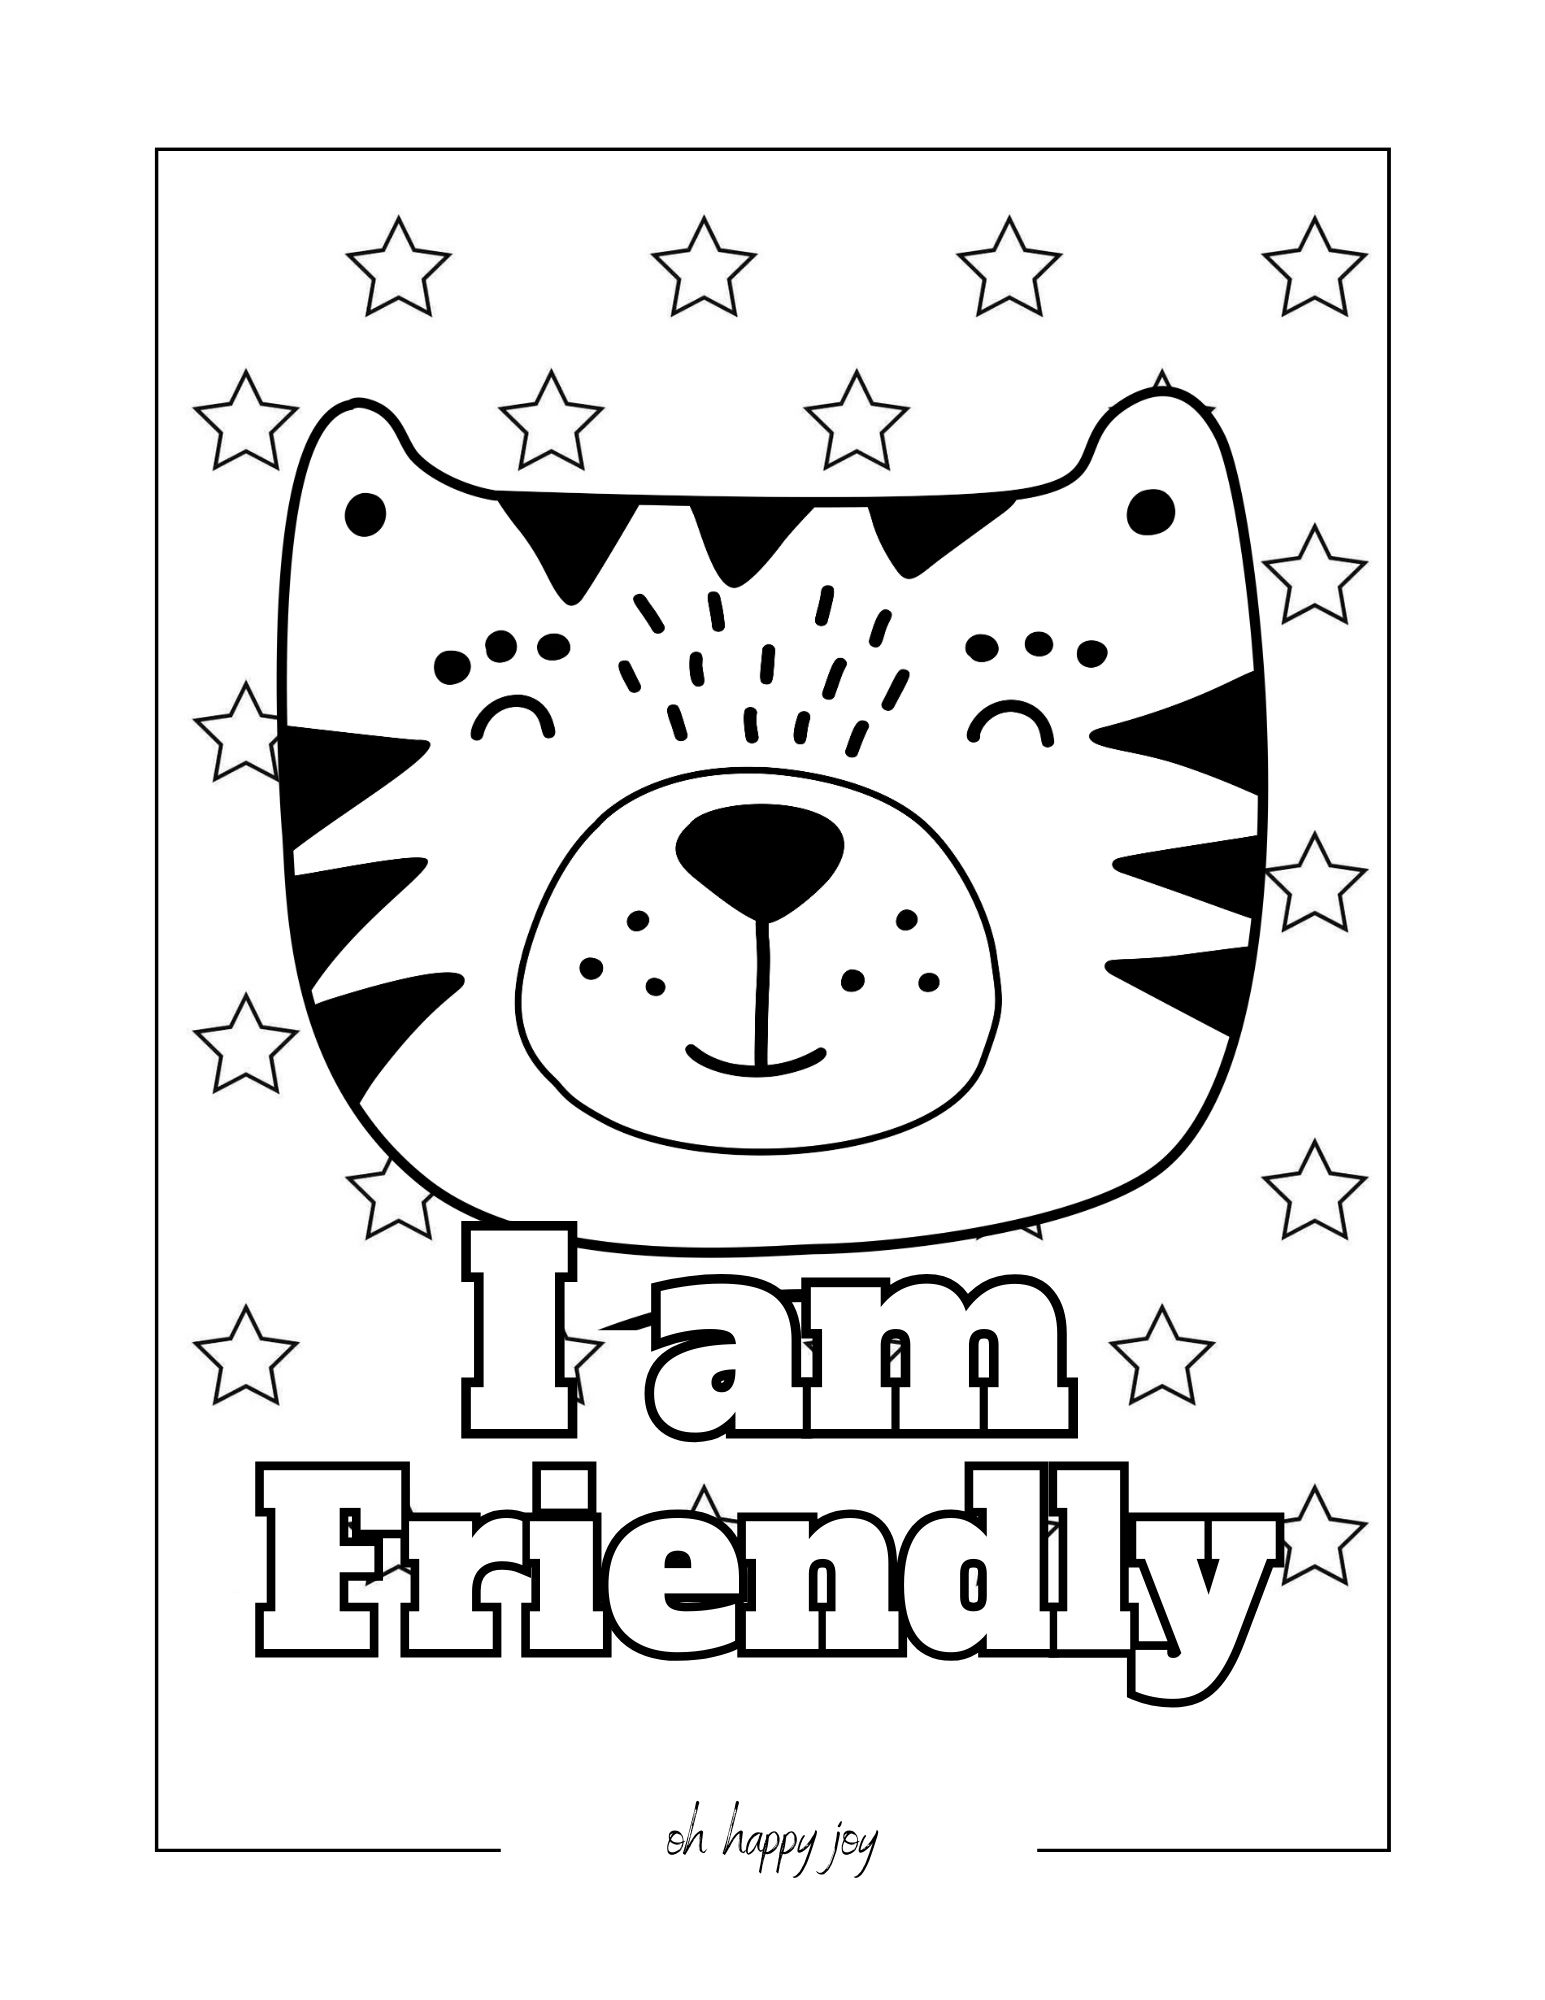 I am friendly affirmation coloring page